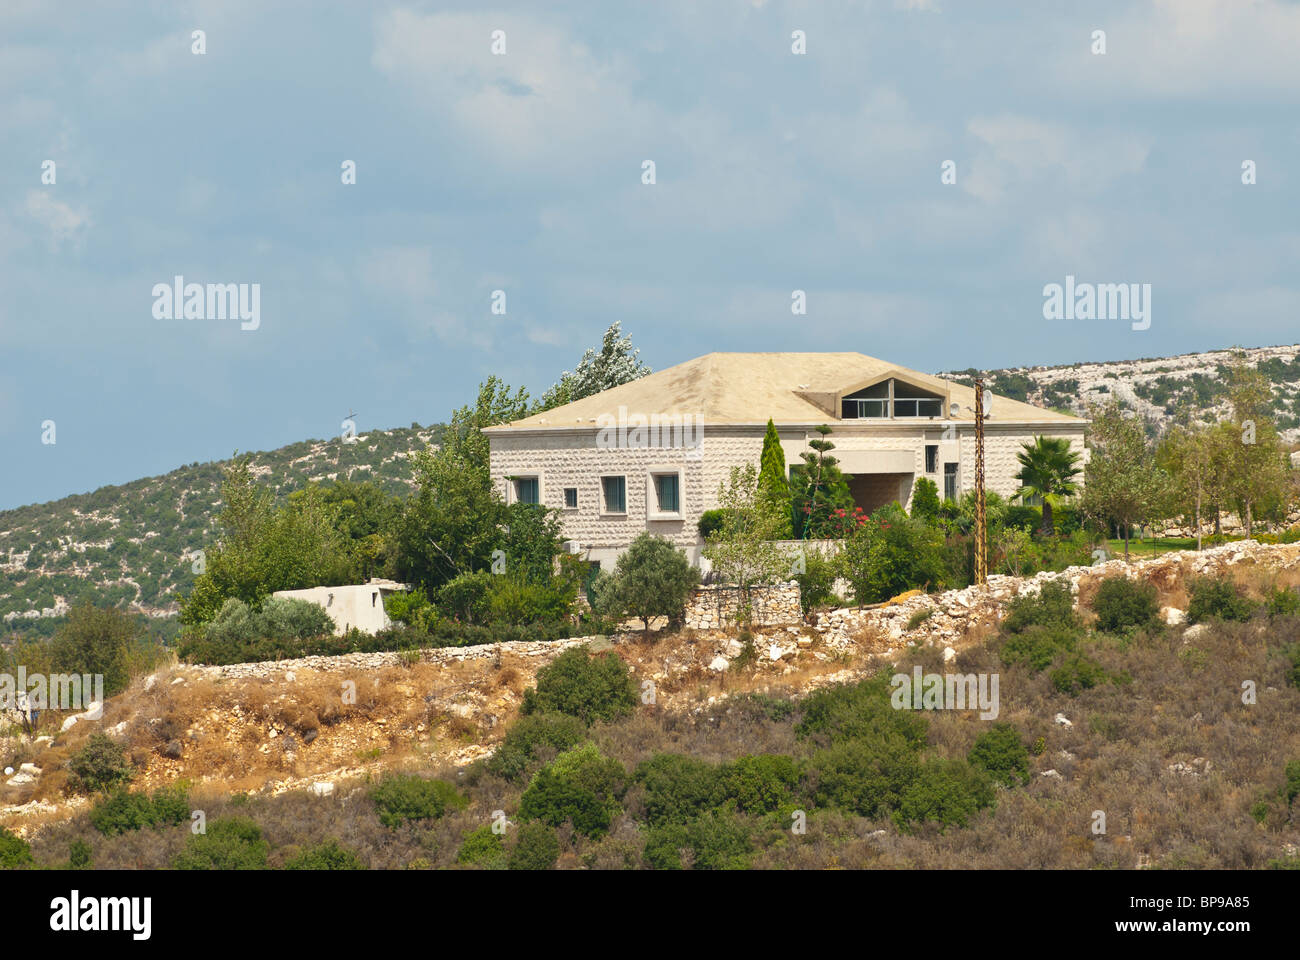 House in the mountains Byblos Lebanon Middle East Stock Photo